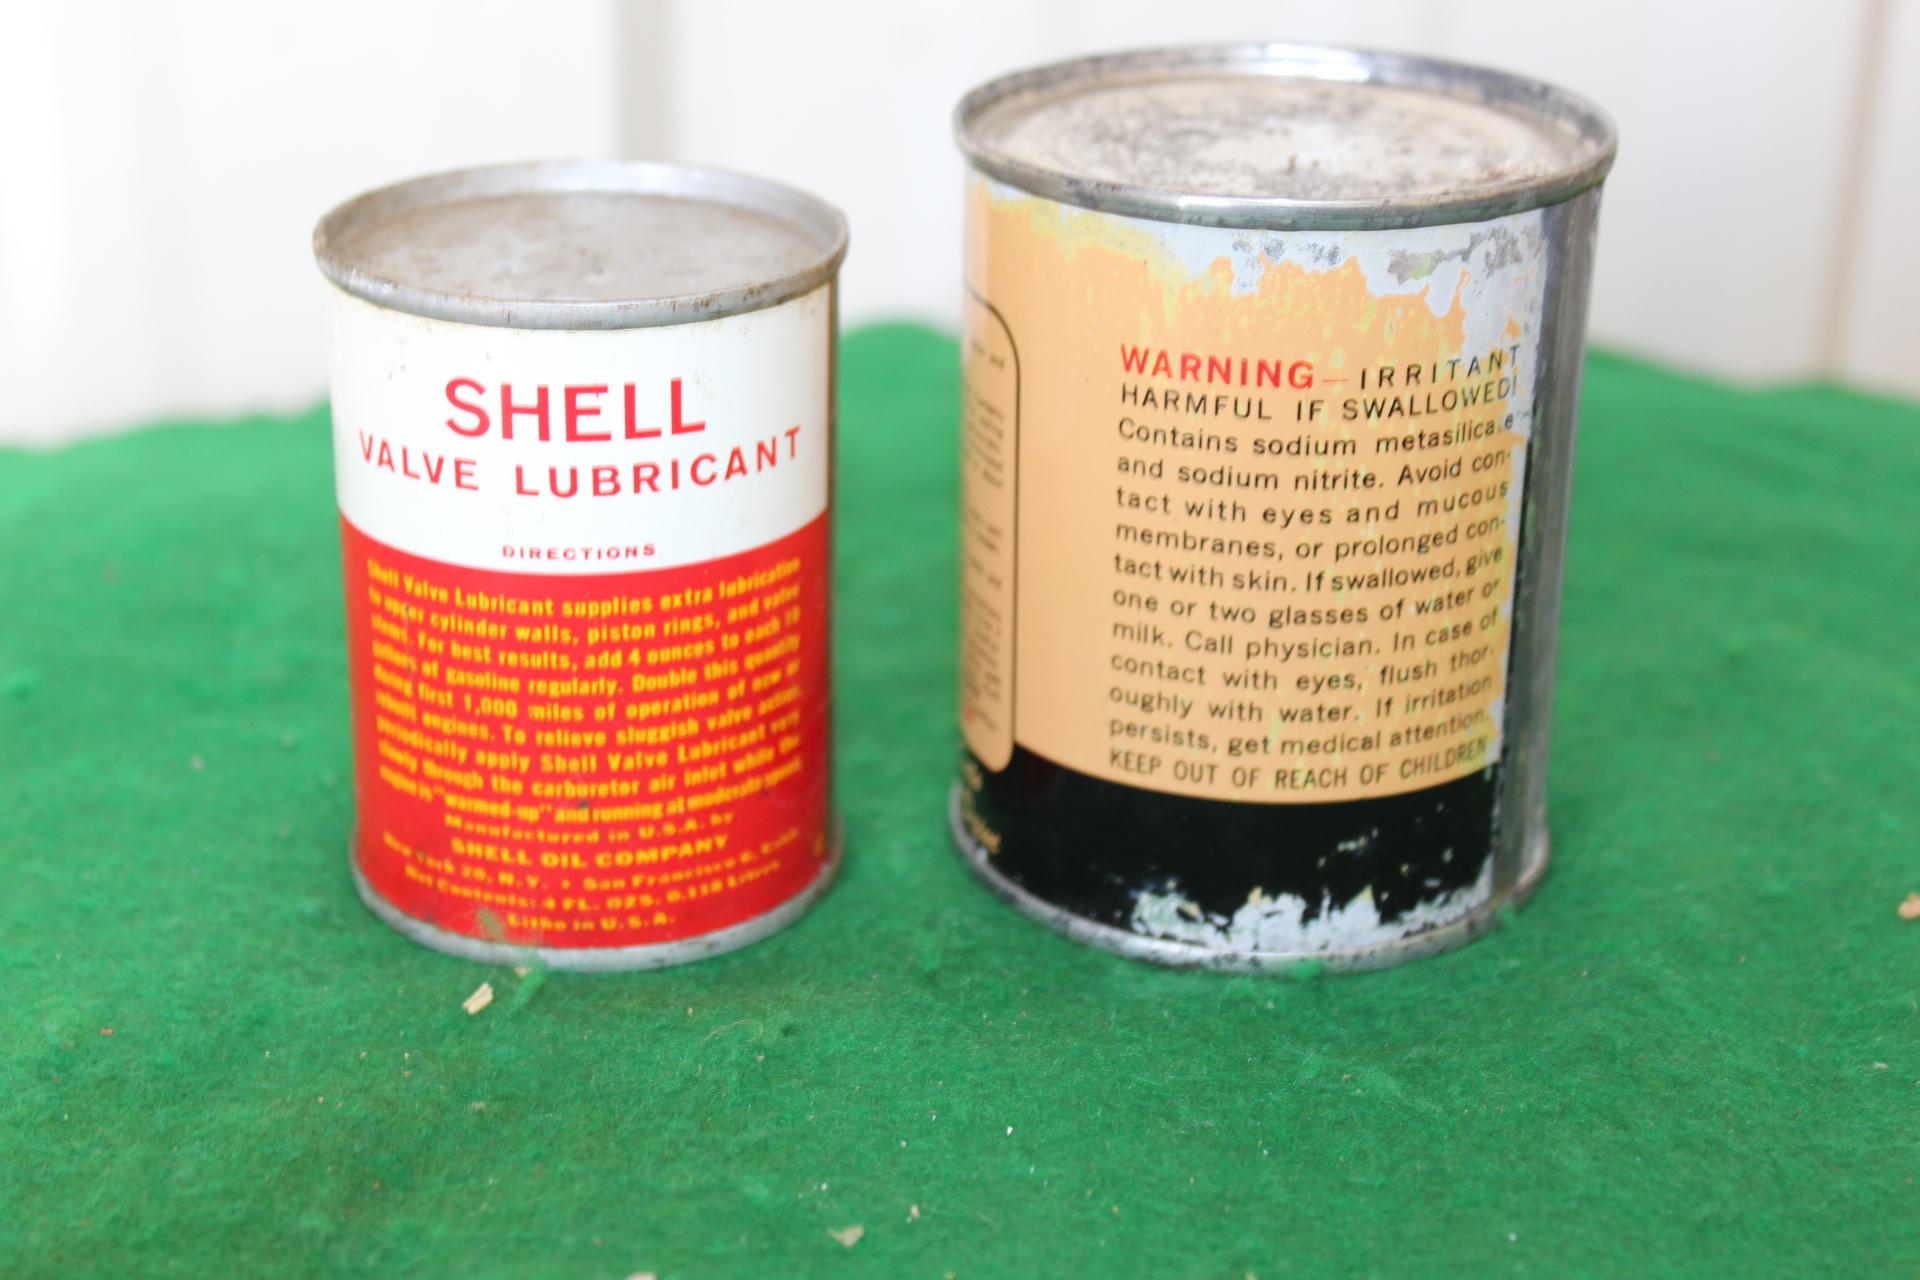 Shell valve lubricant can, Archer rustop concentrated can, both unopened